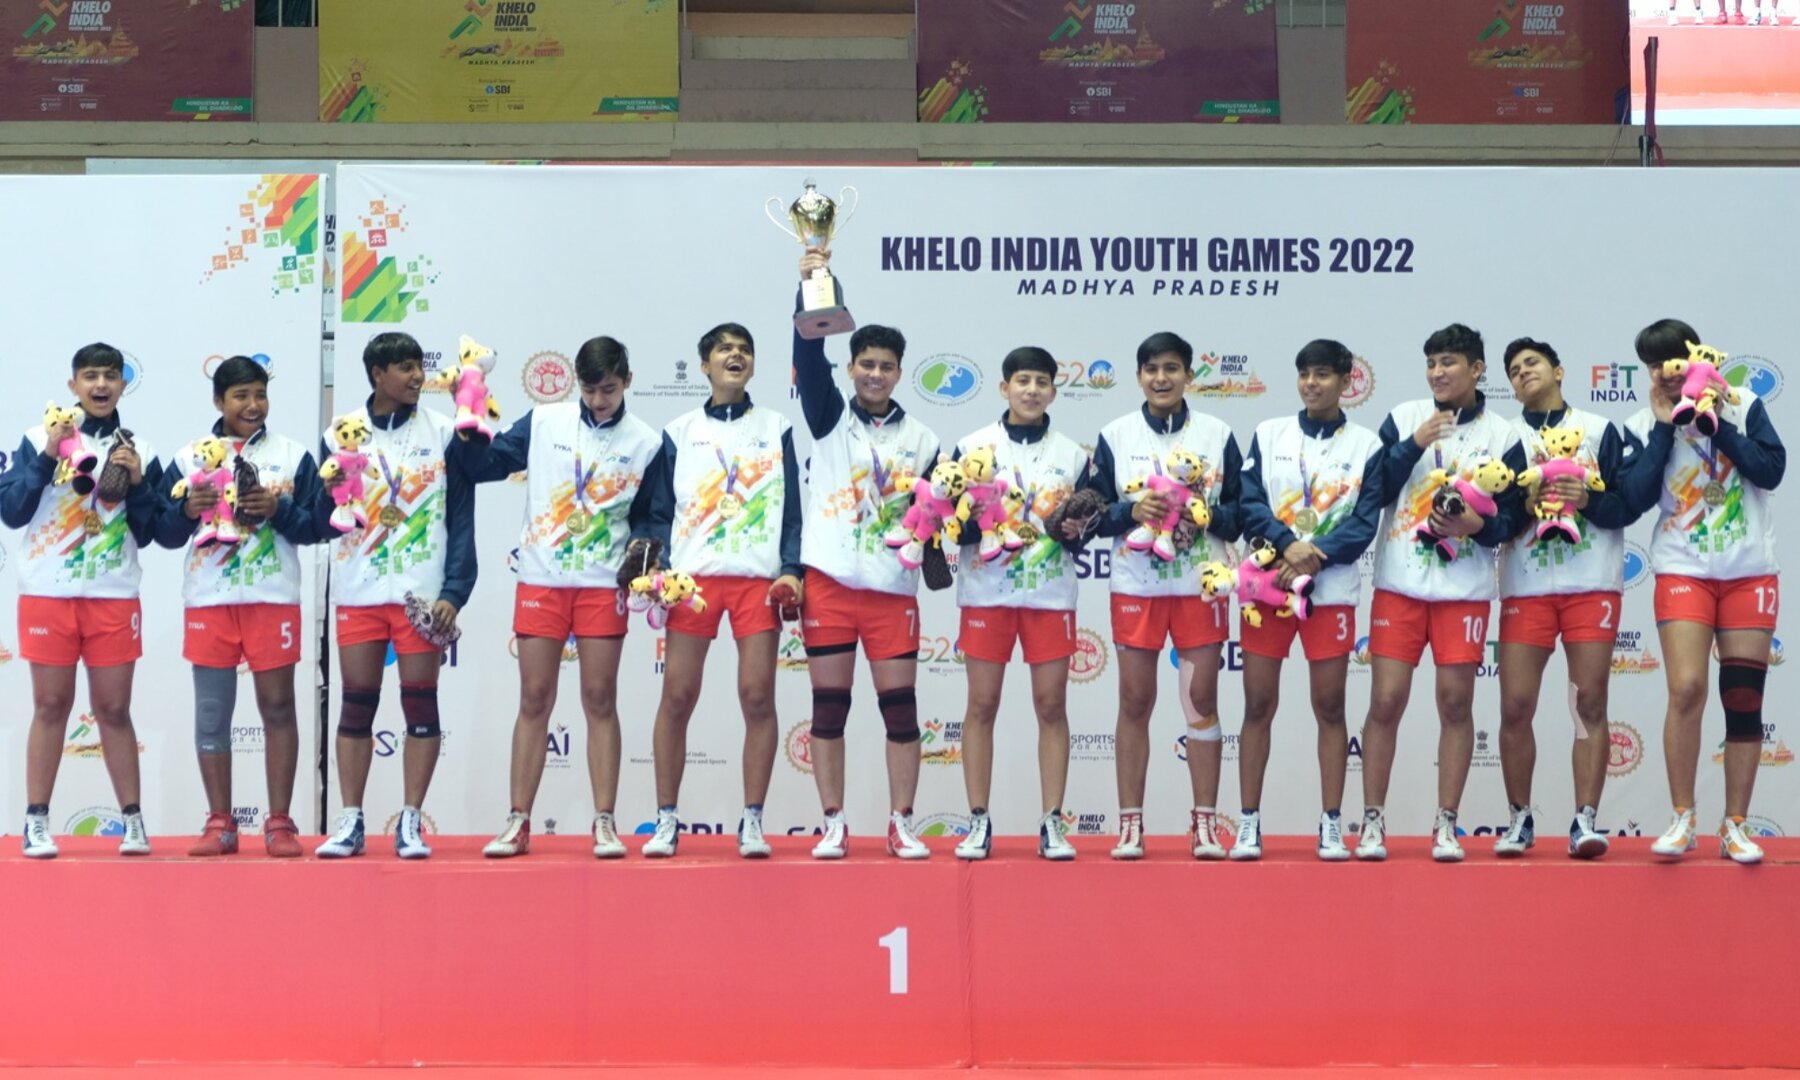 Khelo India Youth Games 2022